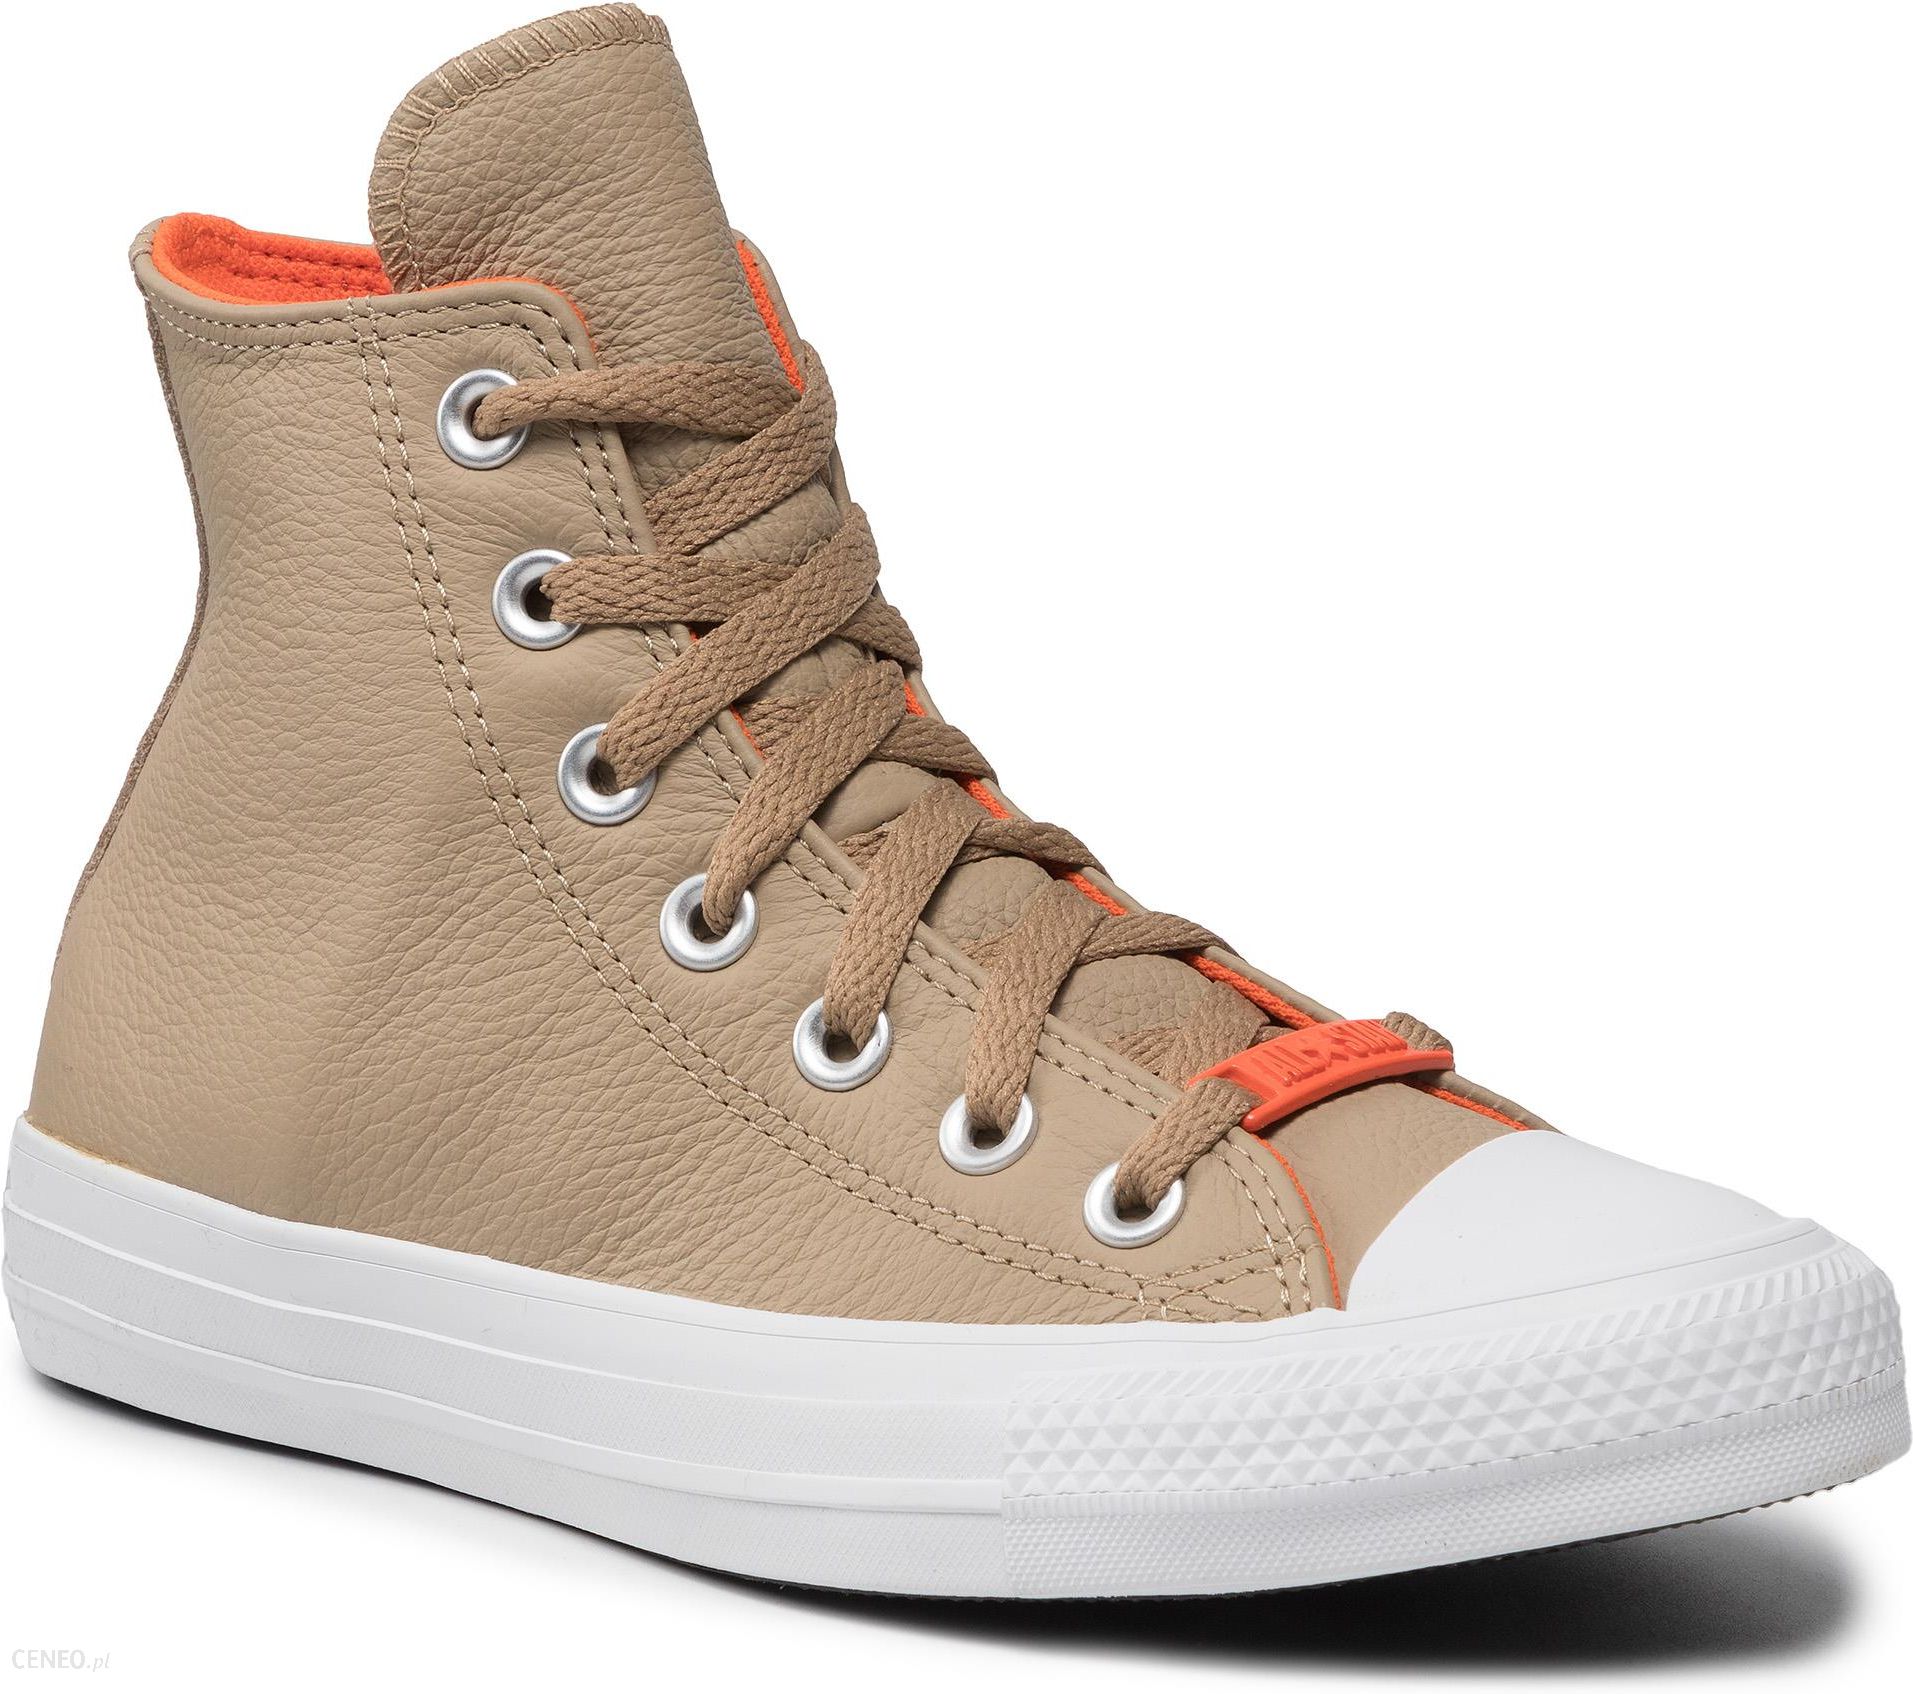 weefgetouw Penelope vloeistof trampki converse damskie białe allegro Quality Promotional Products &  Merchandise | Lowest Prices - Online shopping for the Latest Clothes &  Fashion - OFF 54%